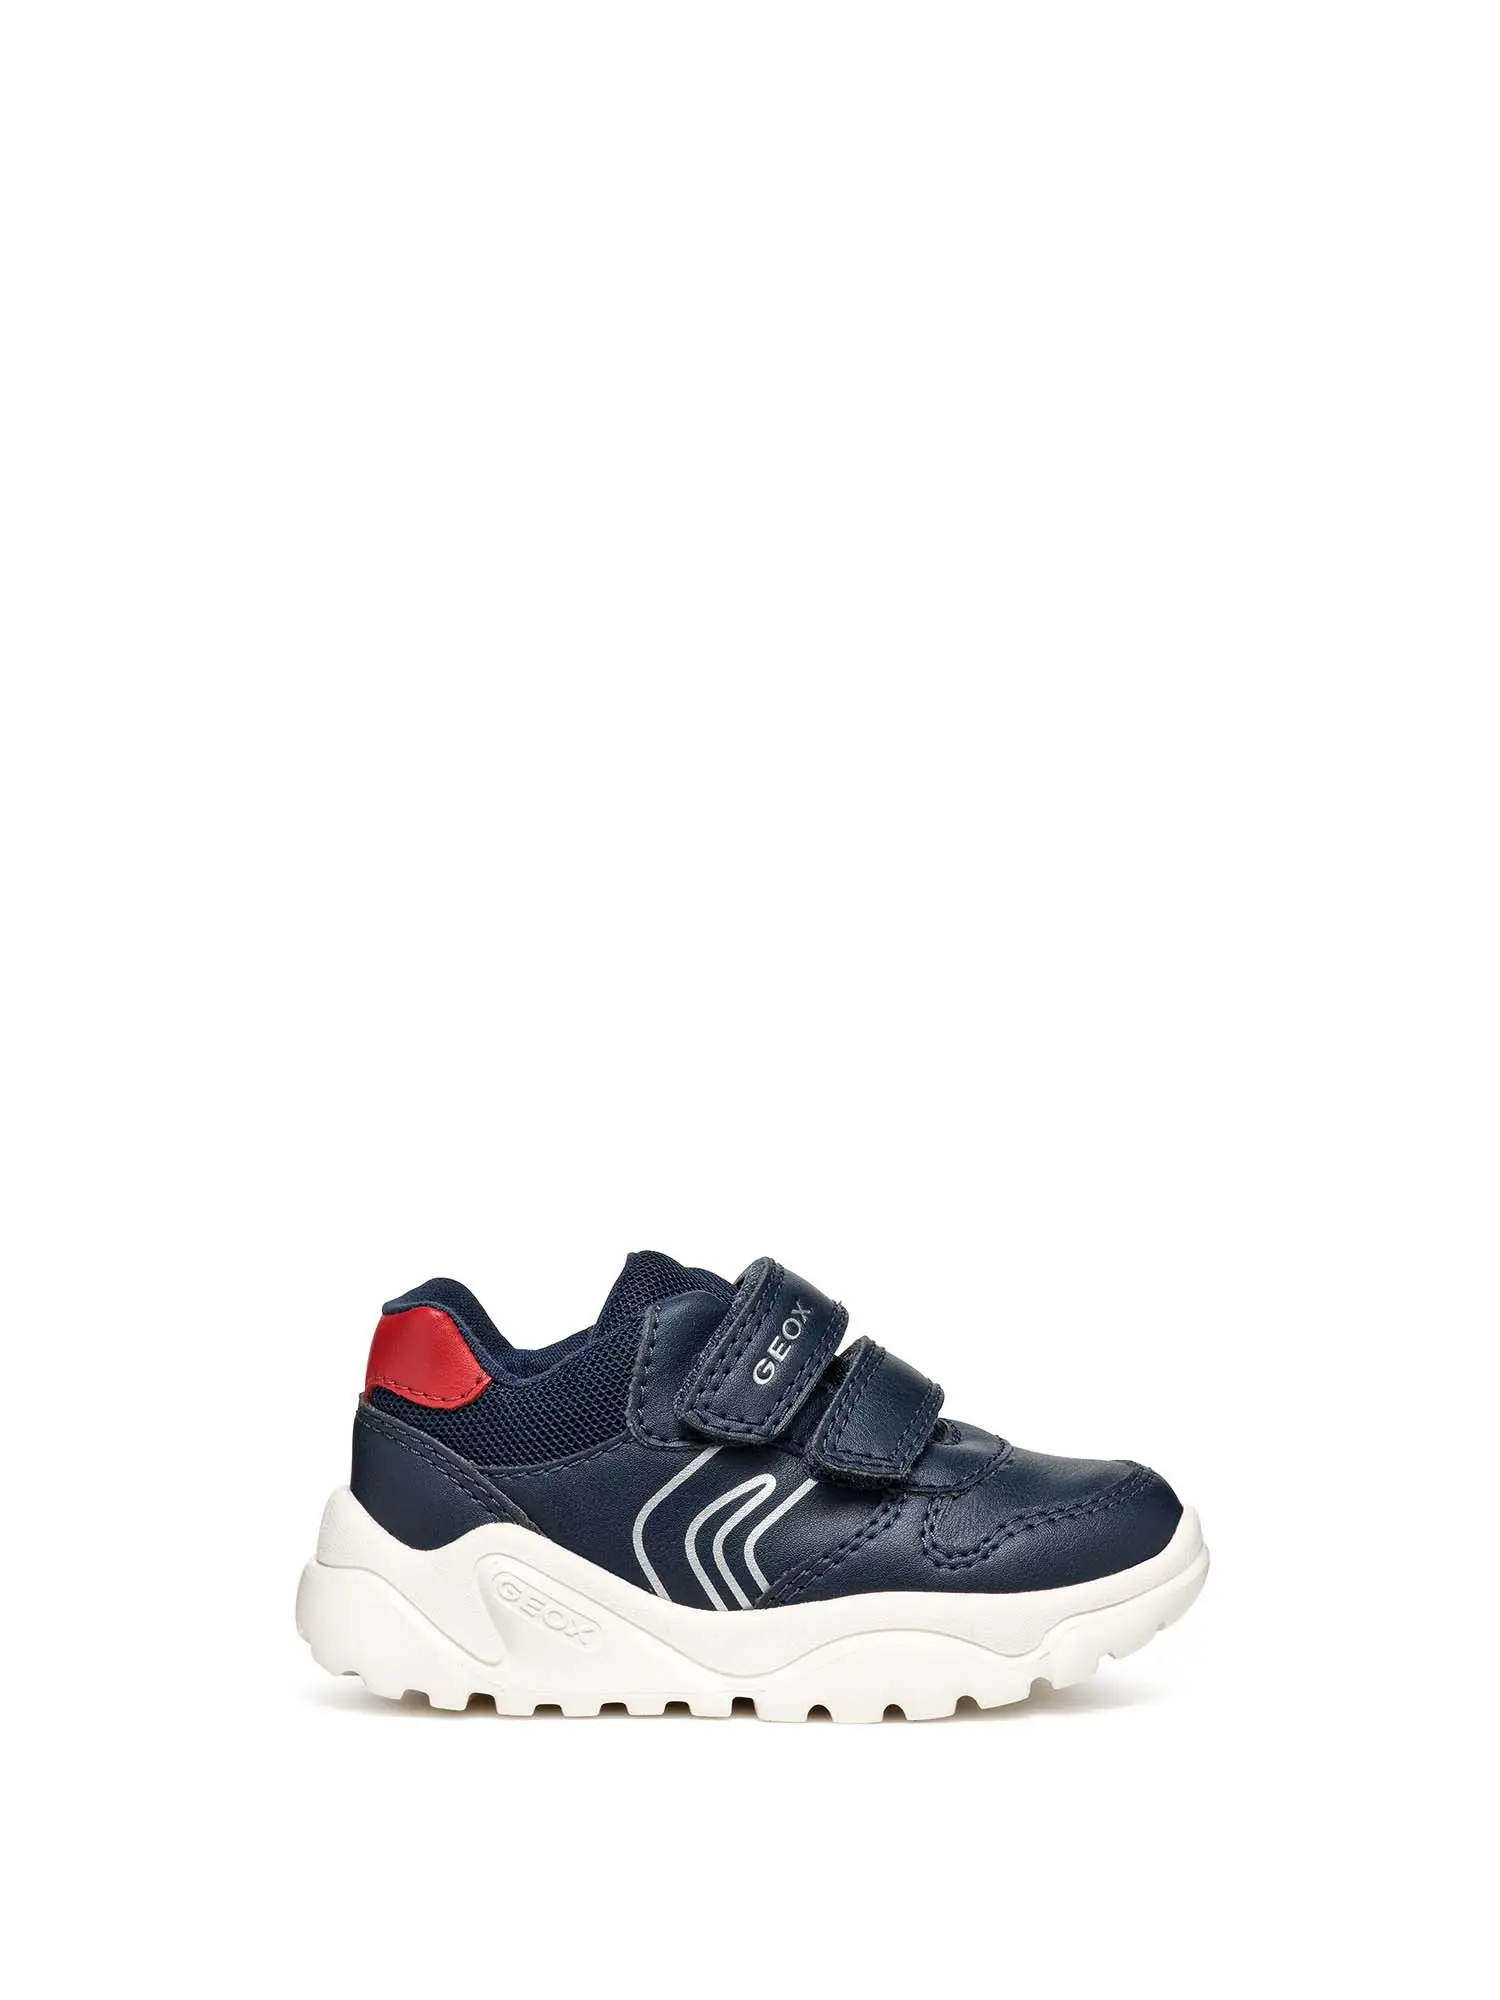 SNEAKERS BAMBINO - GEOX - B455RA 000BC - NAVY/ROSSO, 27